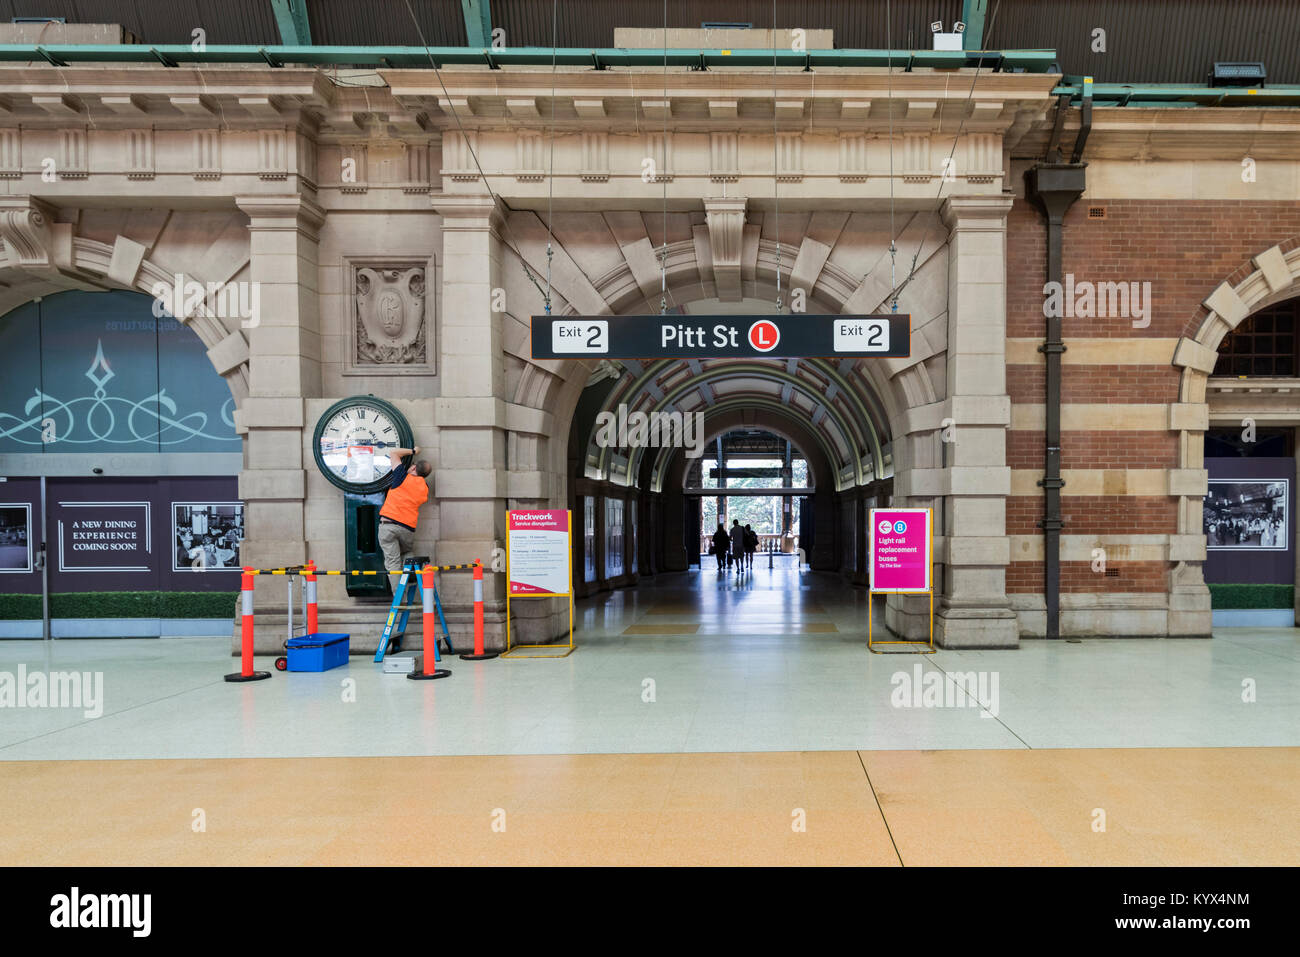 Exit of Pitt St, Interior of Grand Concourse, Central Station, Sydney, NSW, Australia Stock Photo